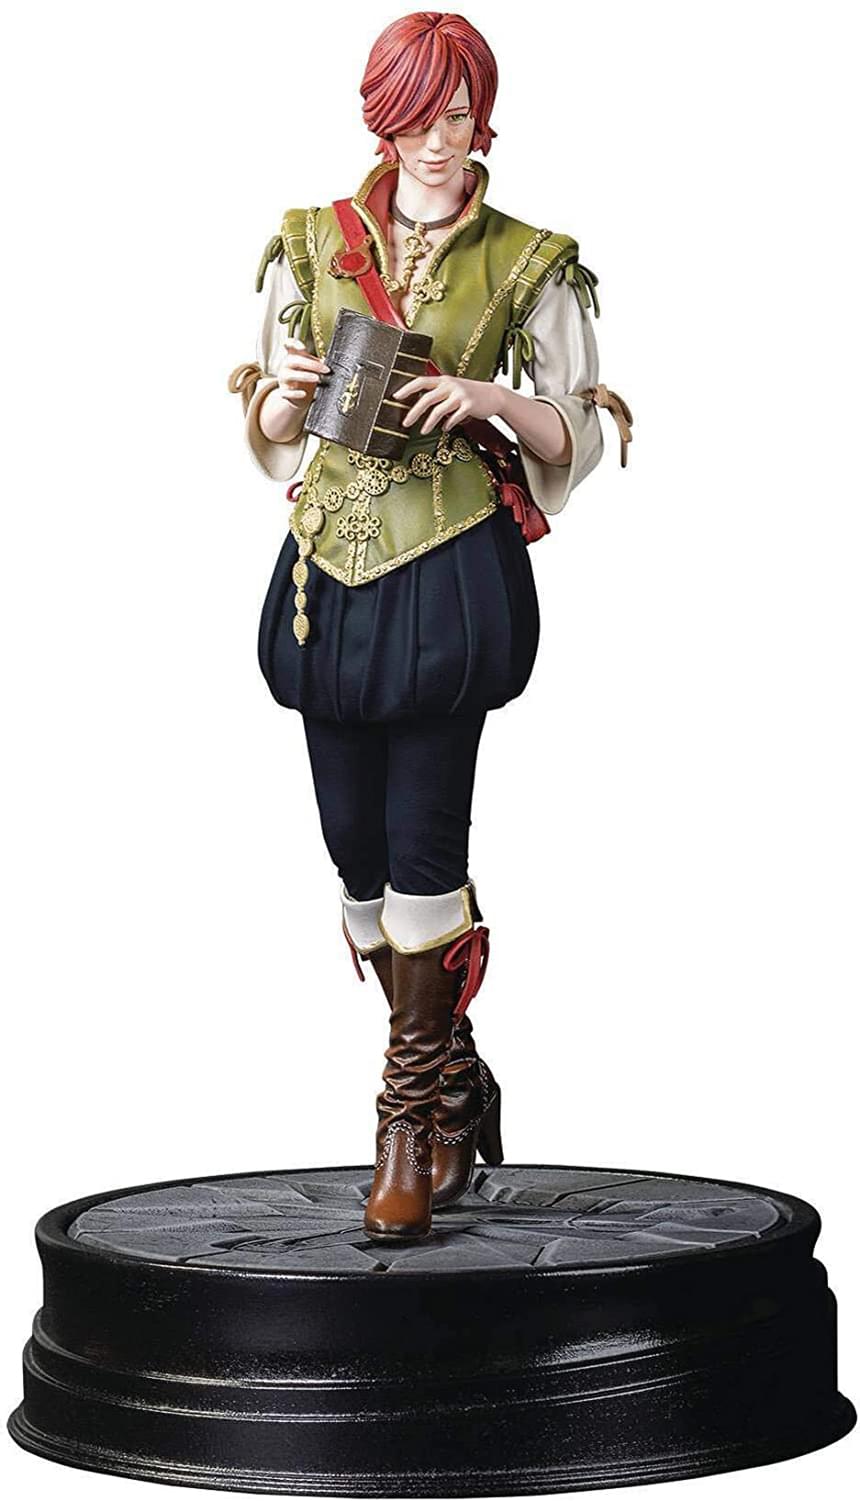 The Witcher 3 Wild Hunt 9.5 Inch Collector Figure | Shani